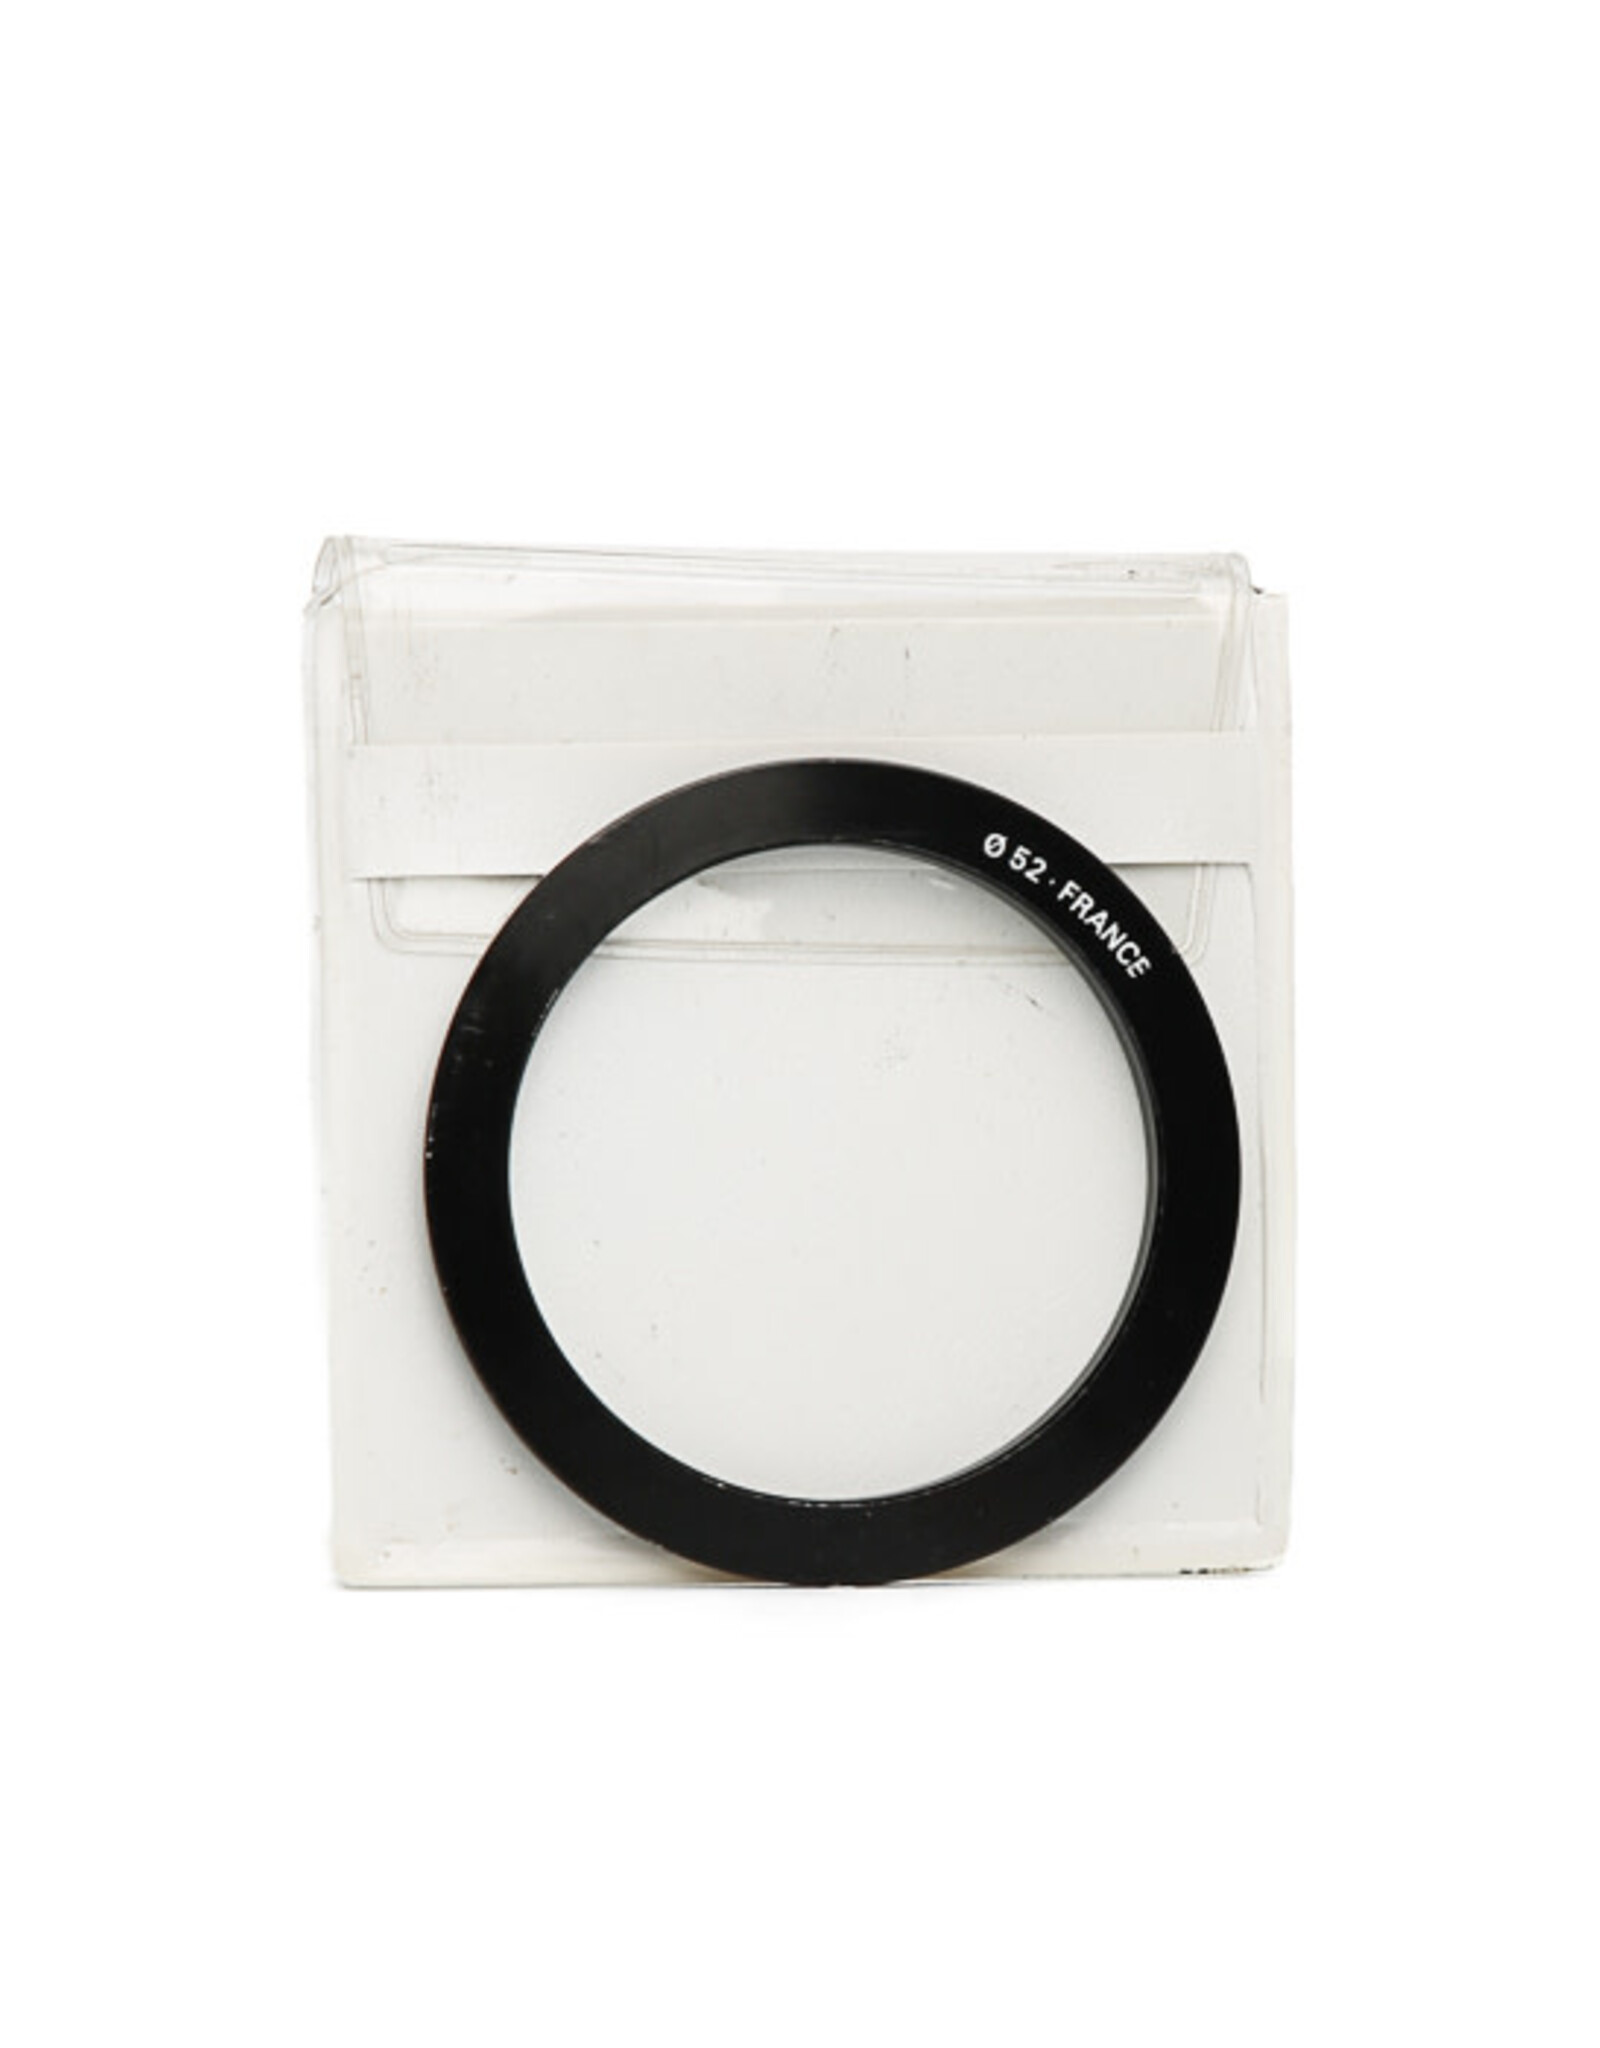 Cokin Used Cokin A Series Filter Holder (52o)